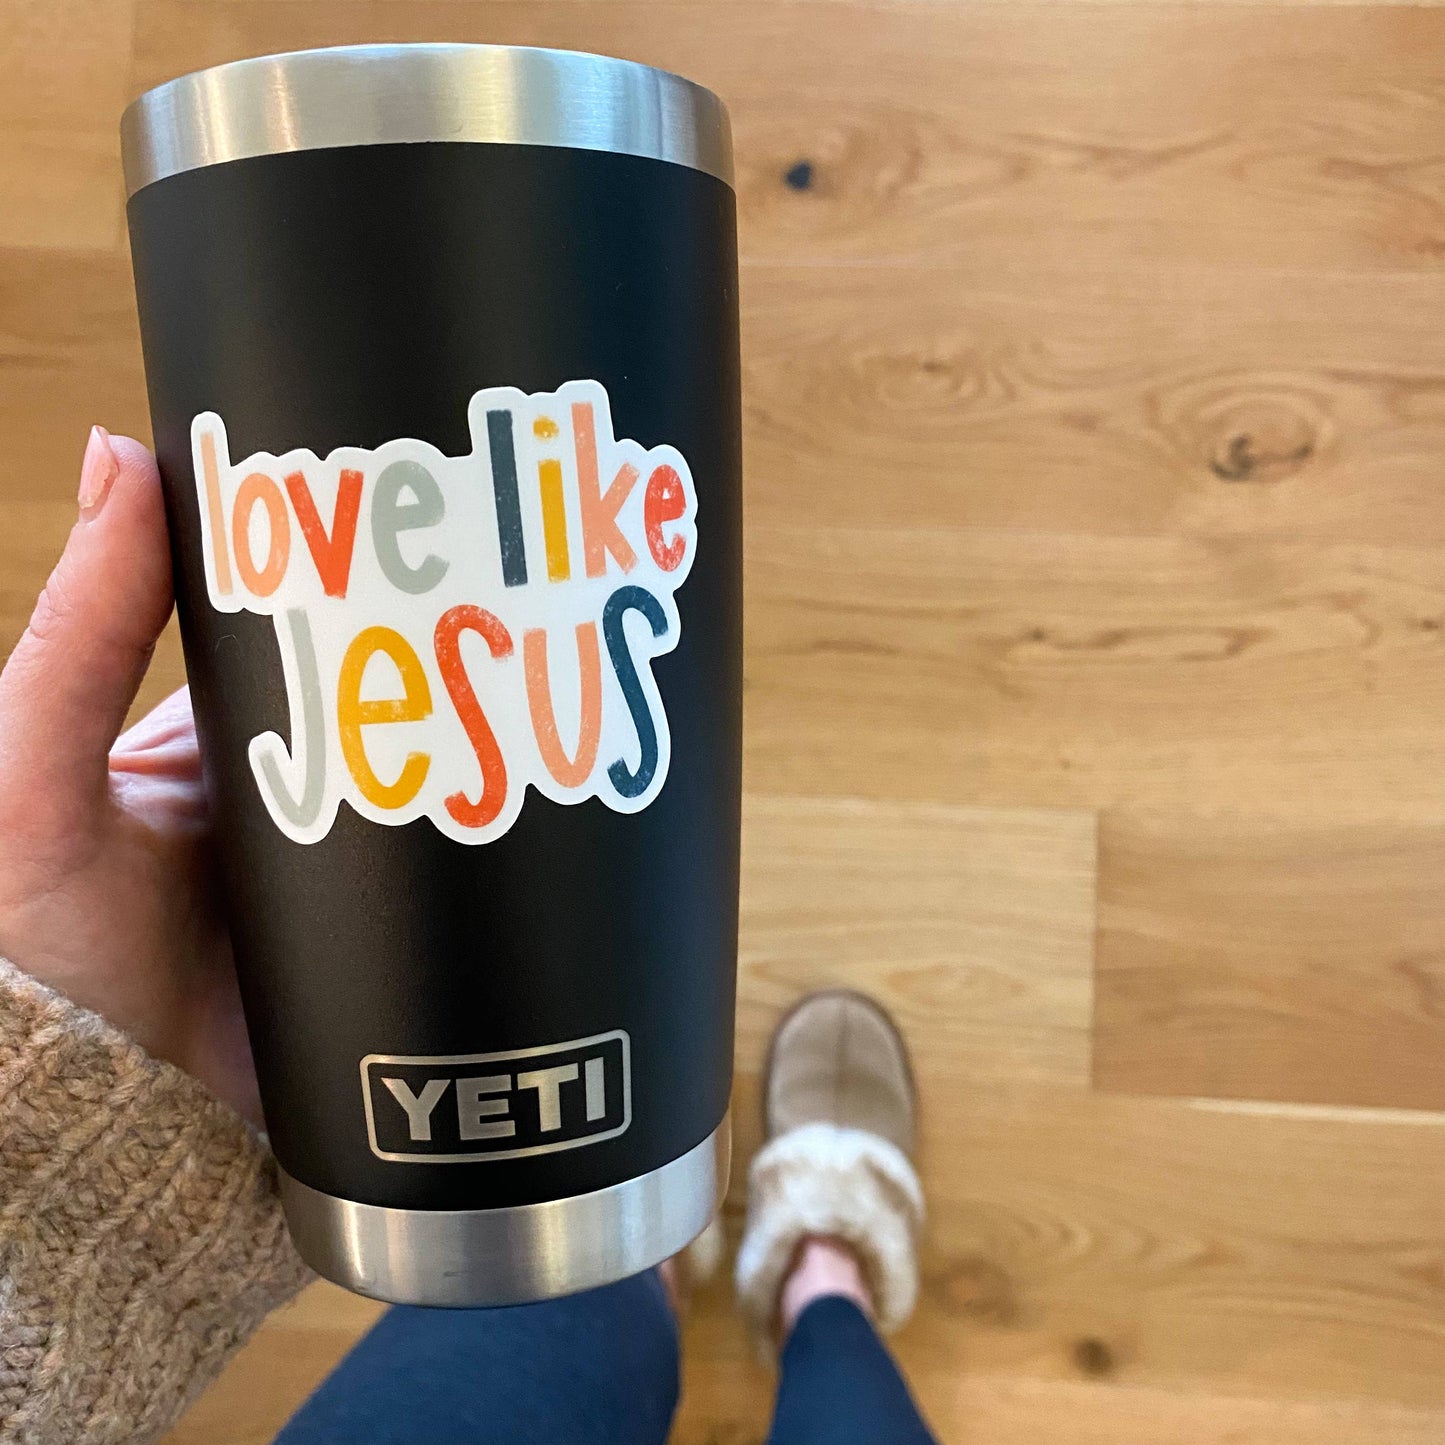 Love like Jesus sticker *FREE SHIPPING with any order over $10